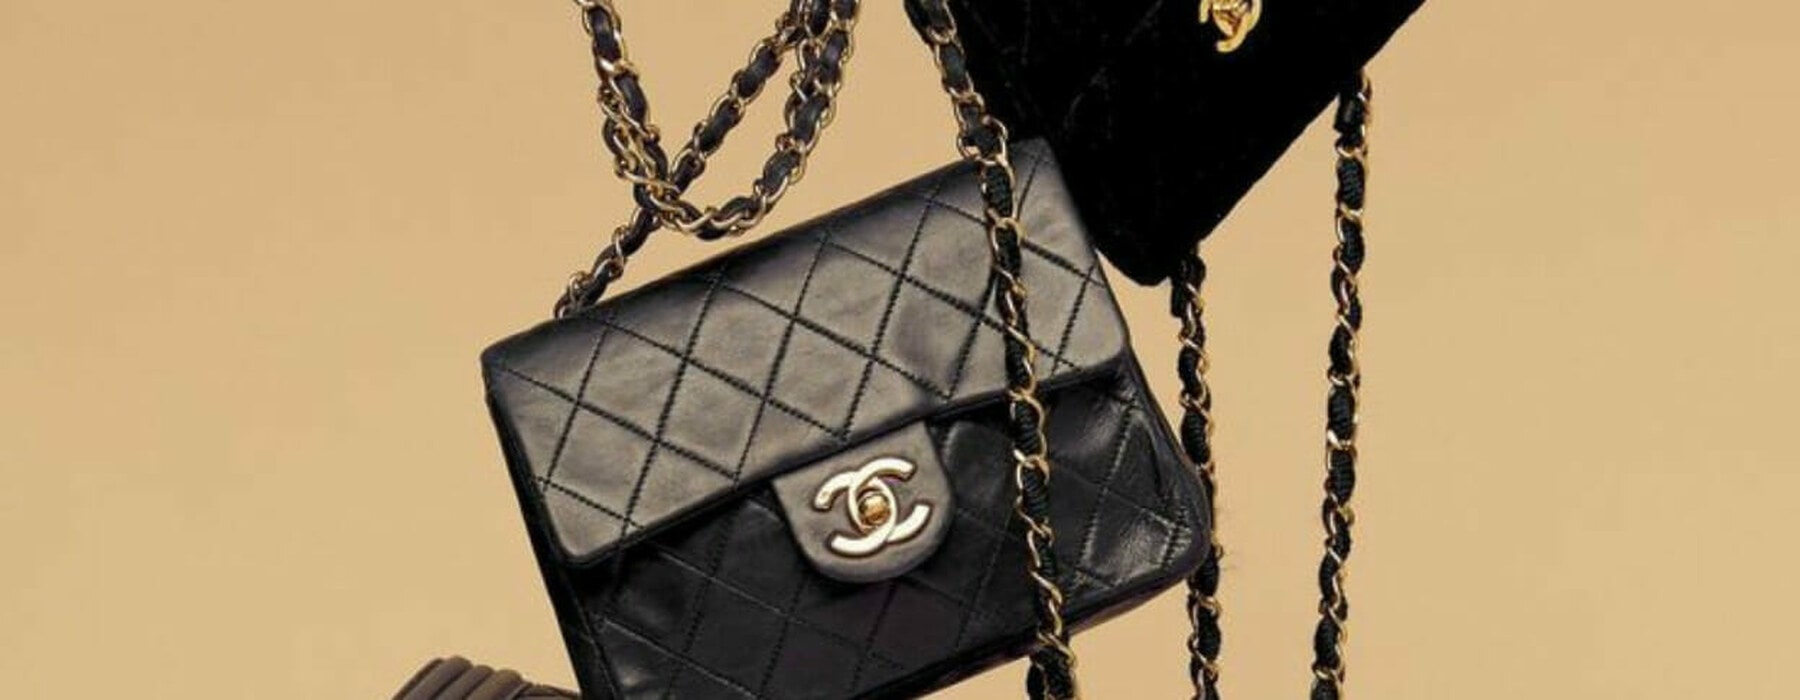 DON'T GET THIS Why I hate the Chanel Classic Flap Bag - Is